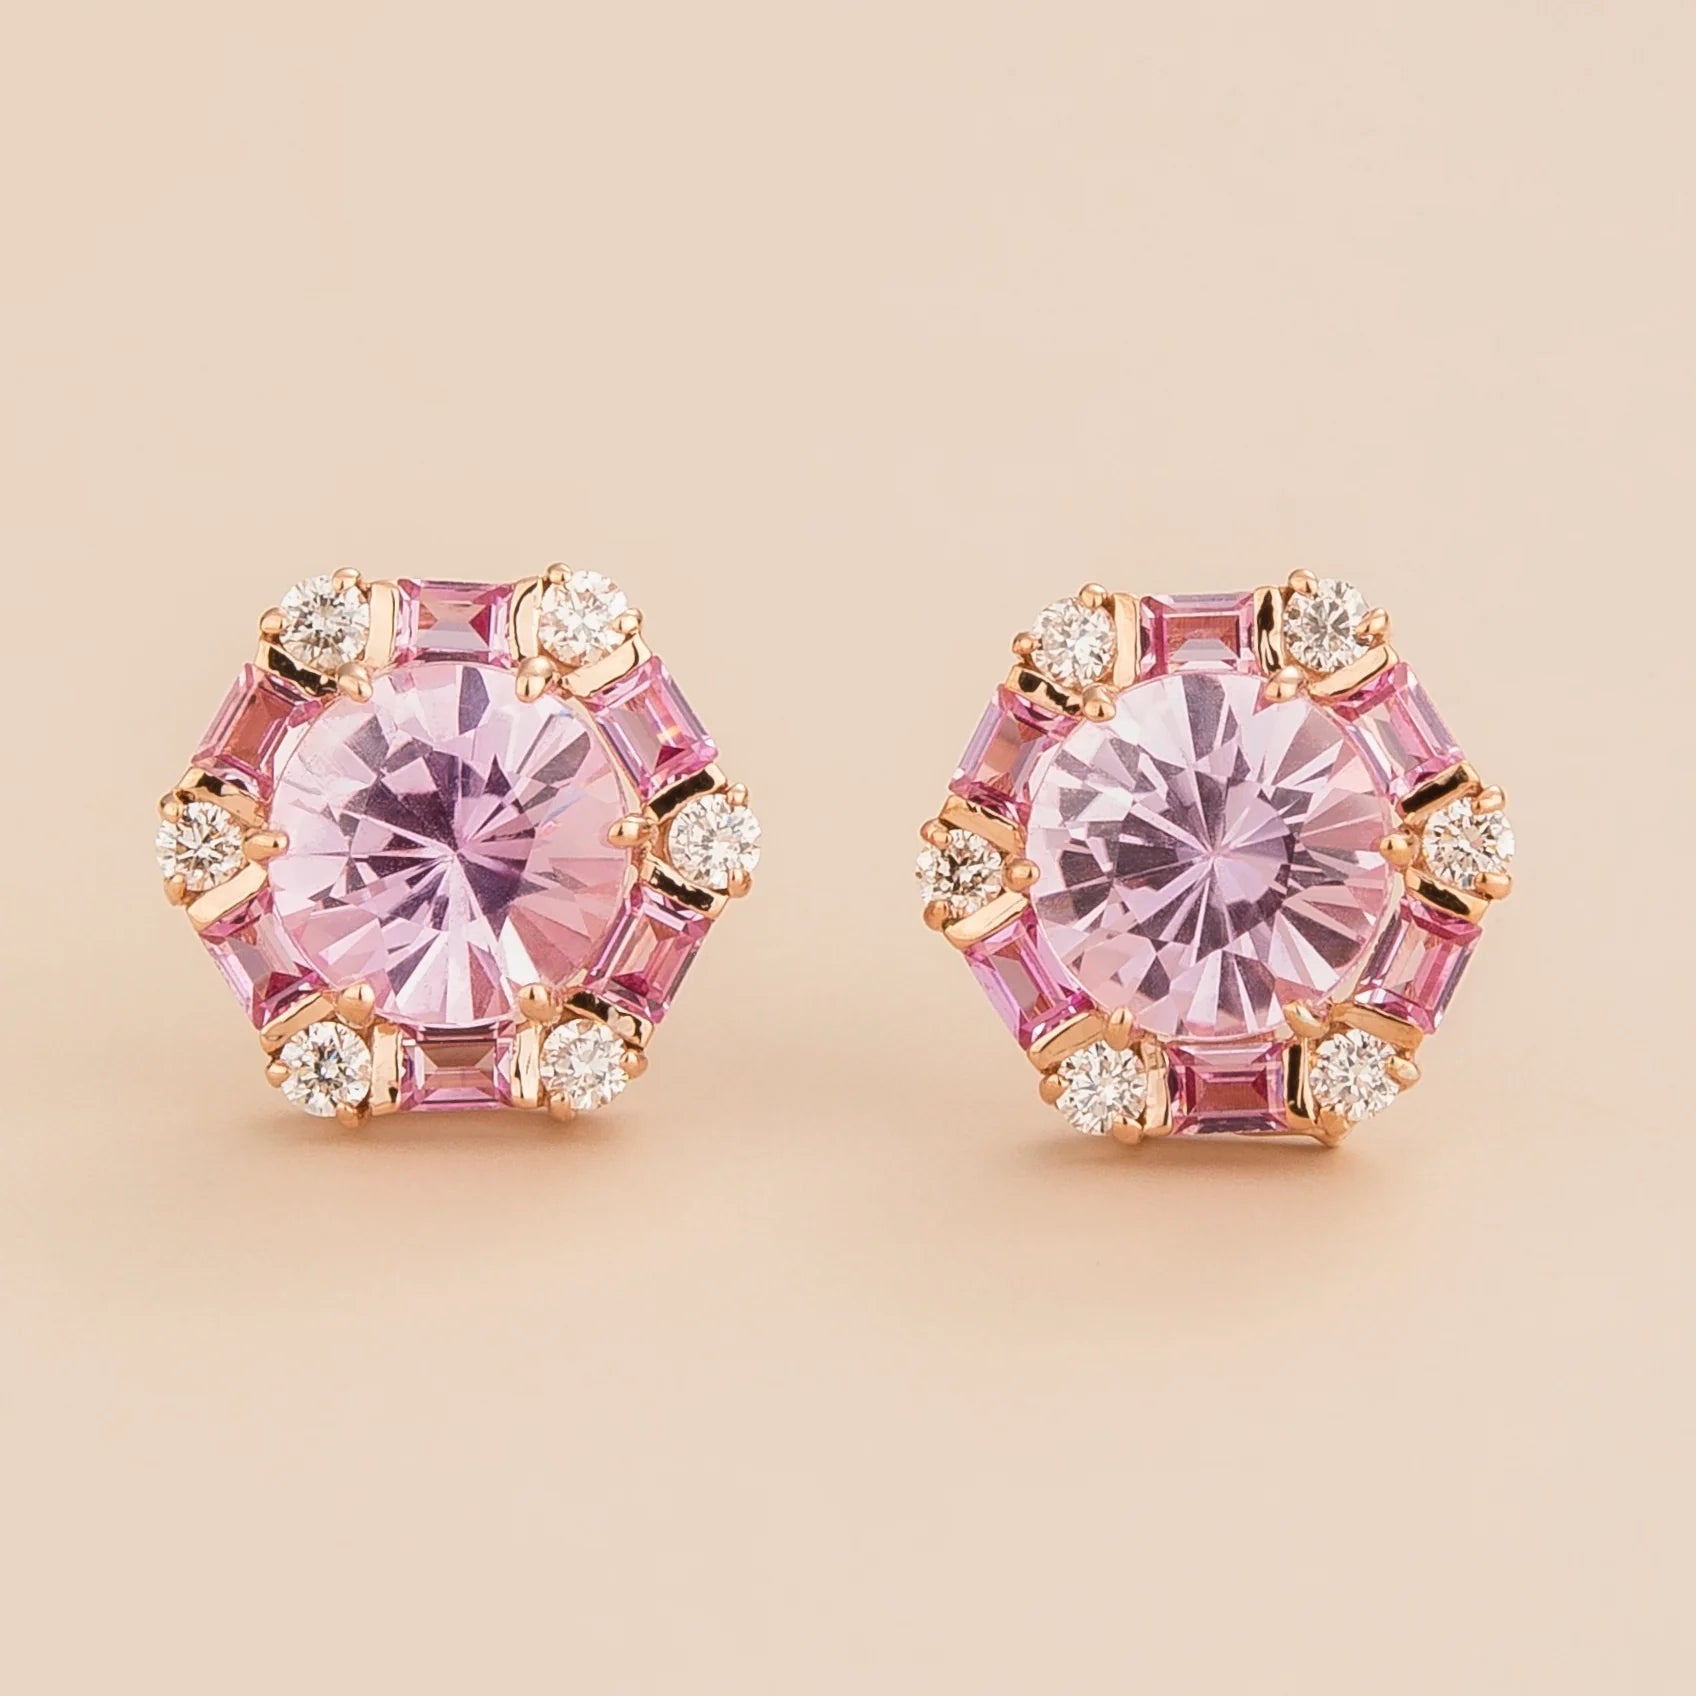 Melba Rose Gold Earrings Set With Pink Sapphire and Diamond By Juvetti London